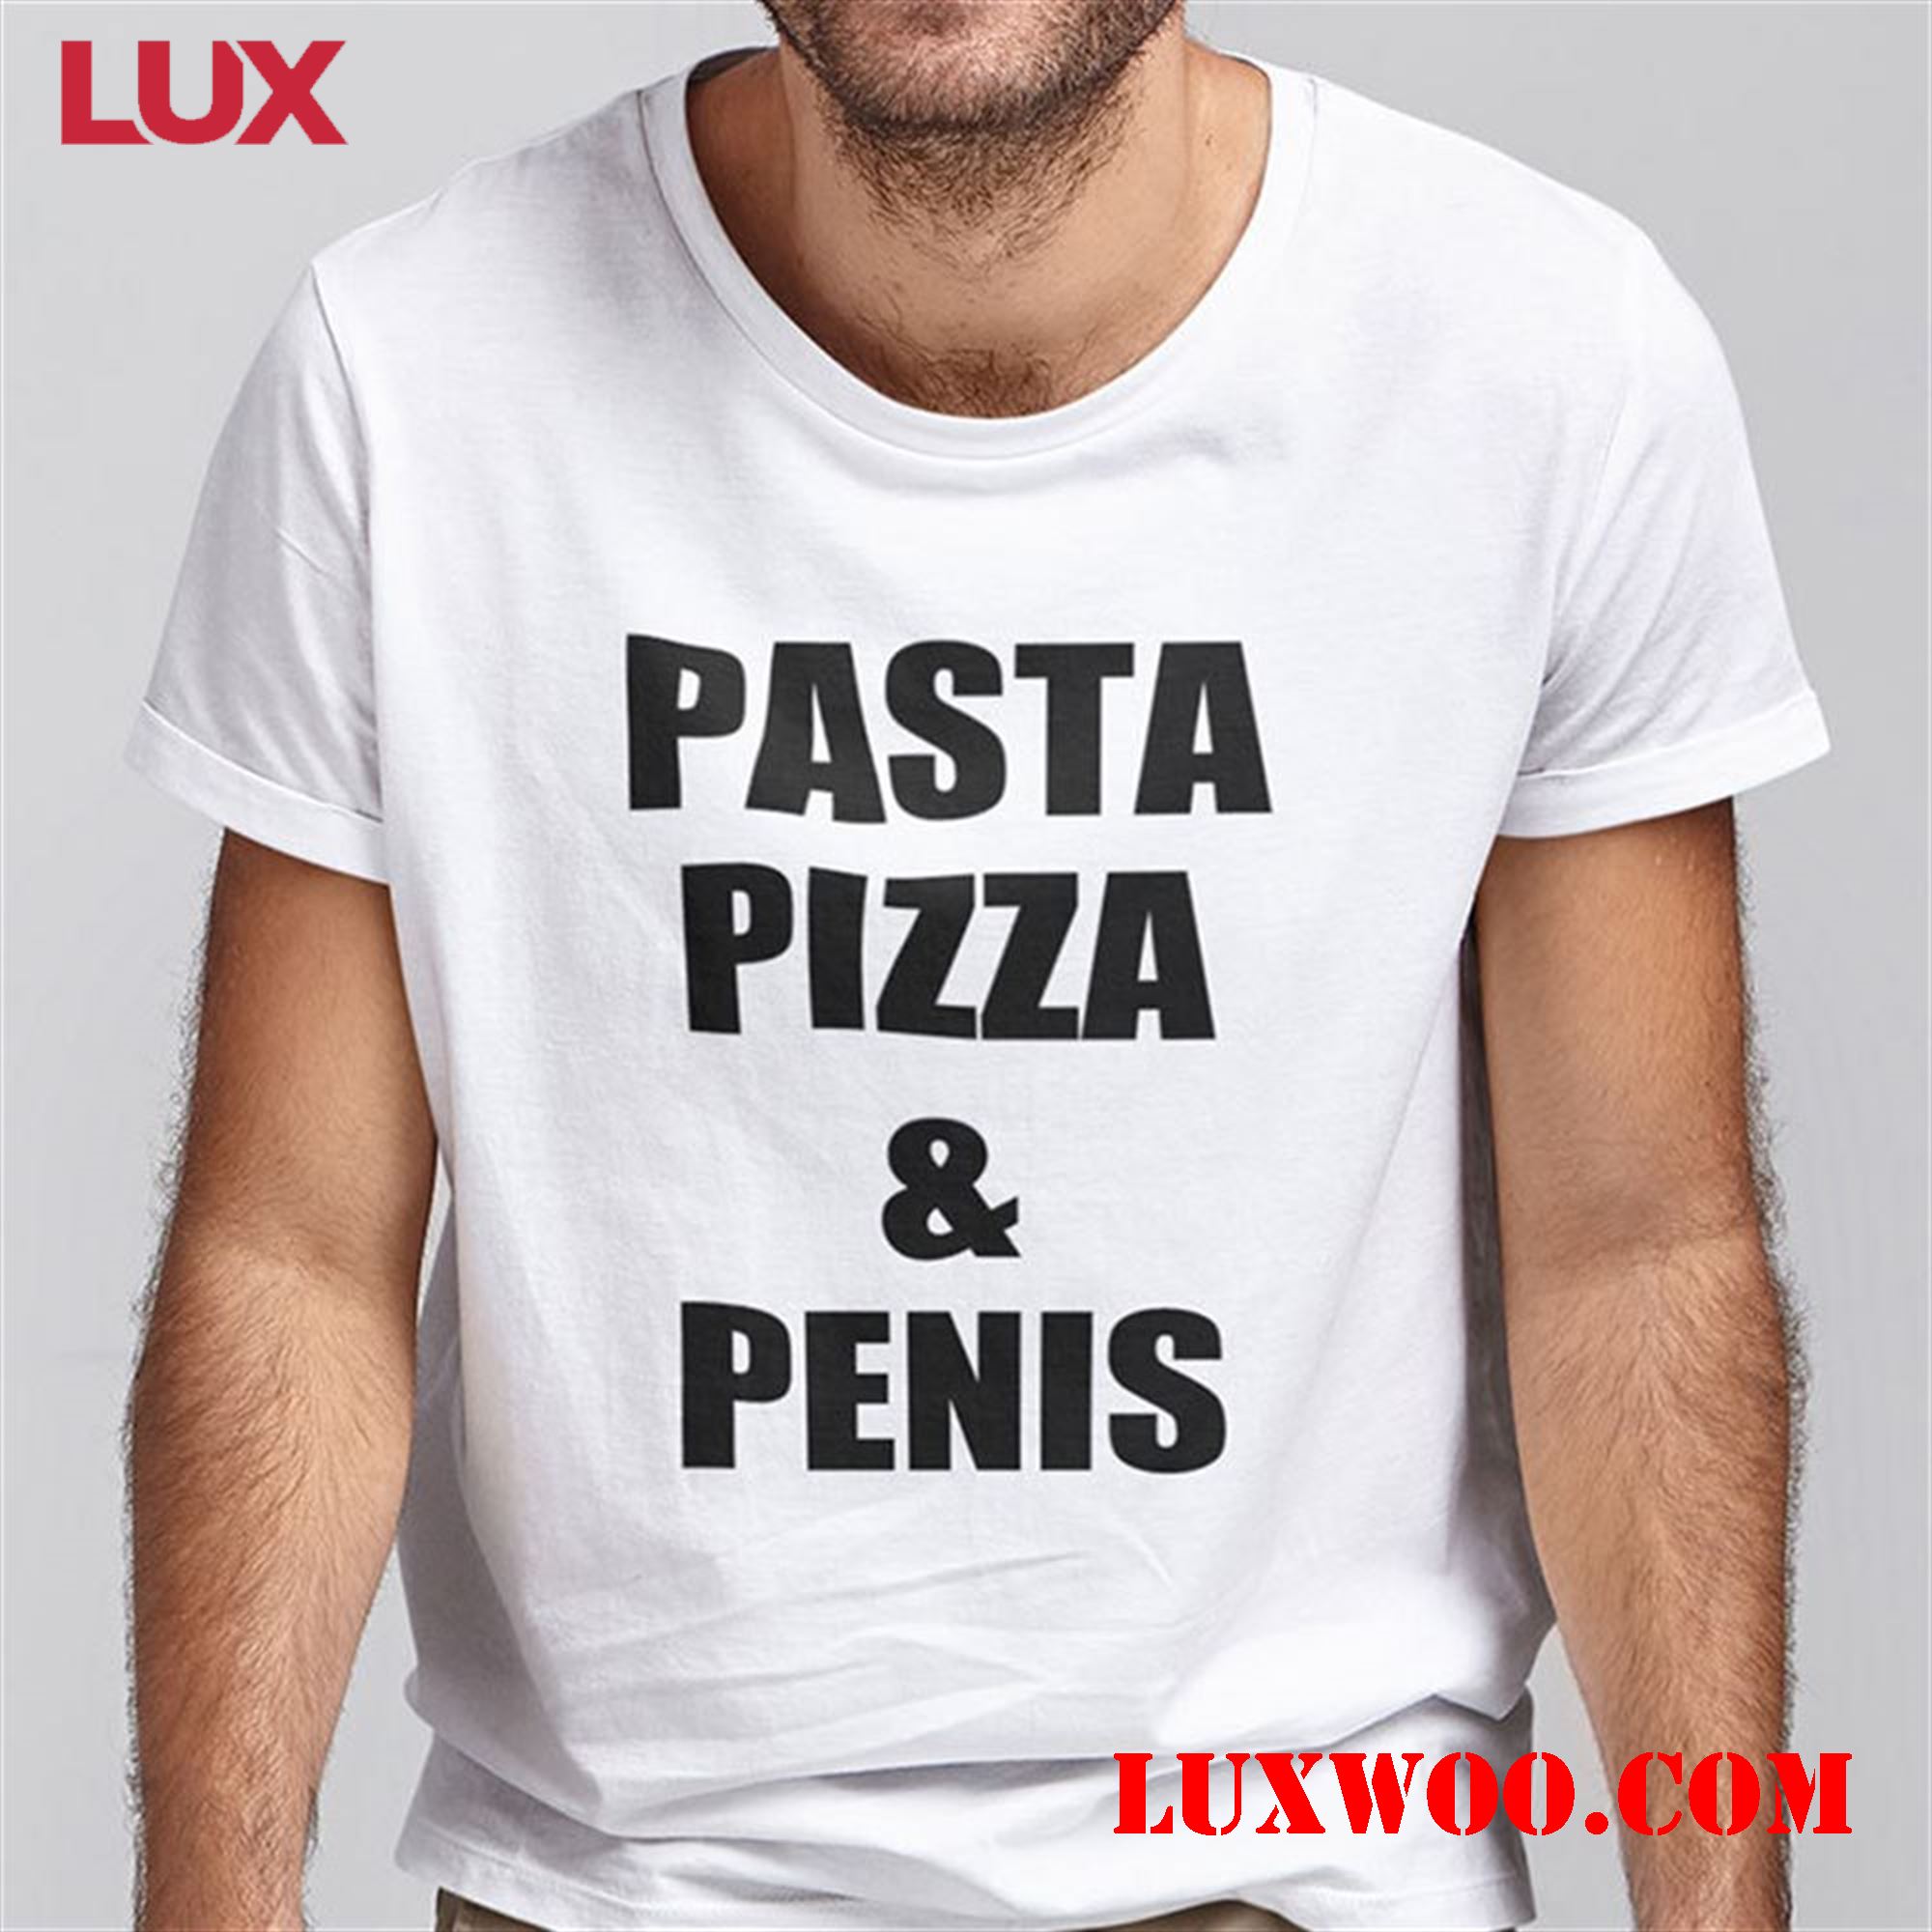 Indulge In Delicious Italian Cuisine With A Unique Pasta Pizza And Penis Shirt 